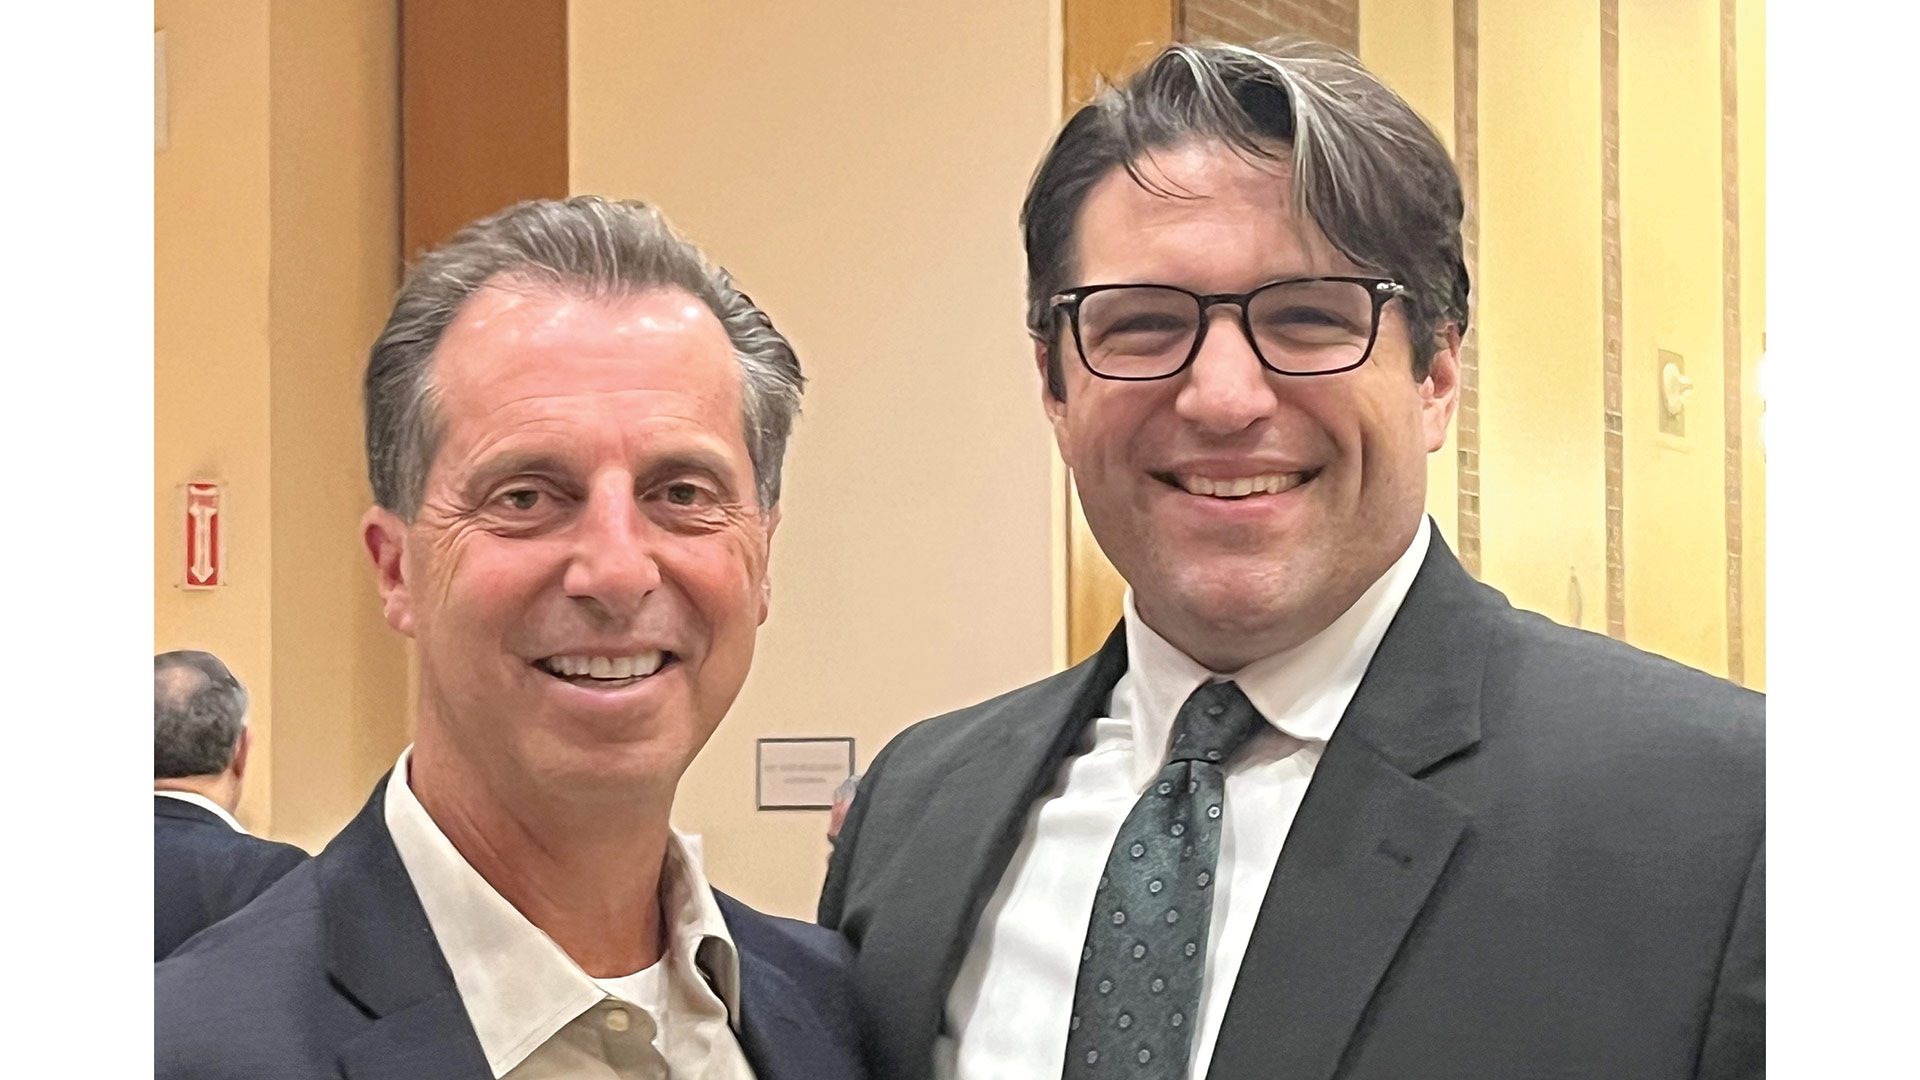 Adam Berman, CEO of JGS Lifecare (pictured, right, with Rudy D’Agostino, partner at Meyers Brothers Kalicka, P.C. and treasurer of JGS Lifecare, who received the Chair’s Service Award at the meeting).